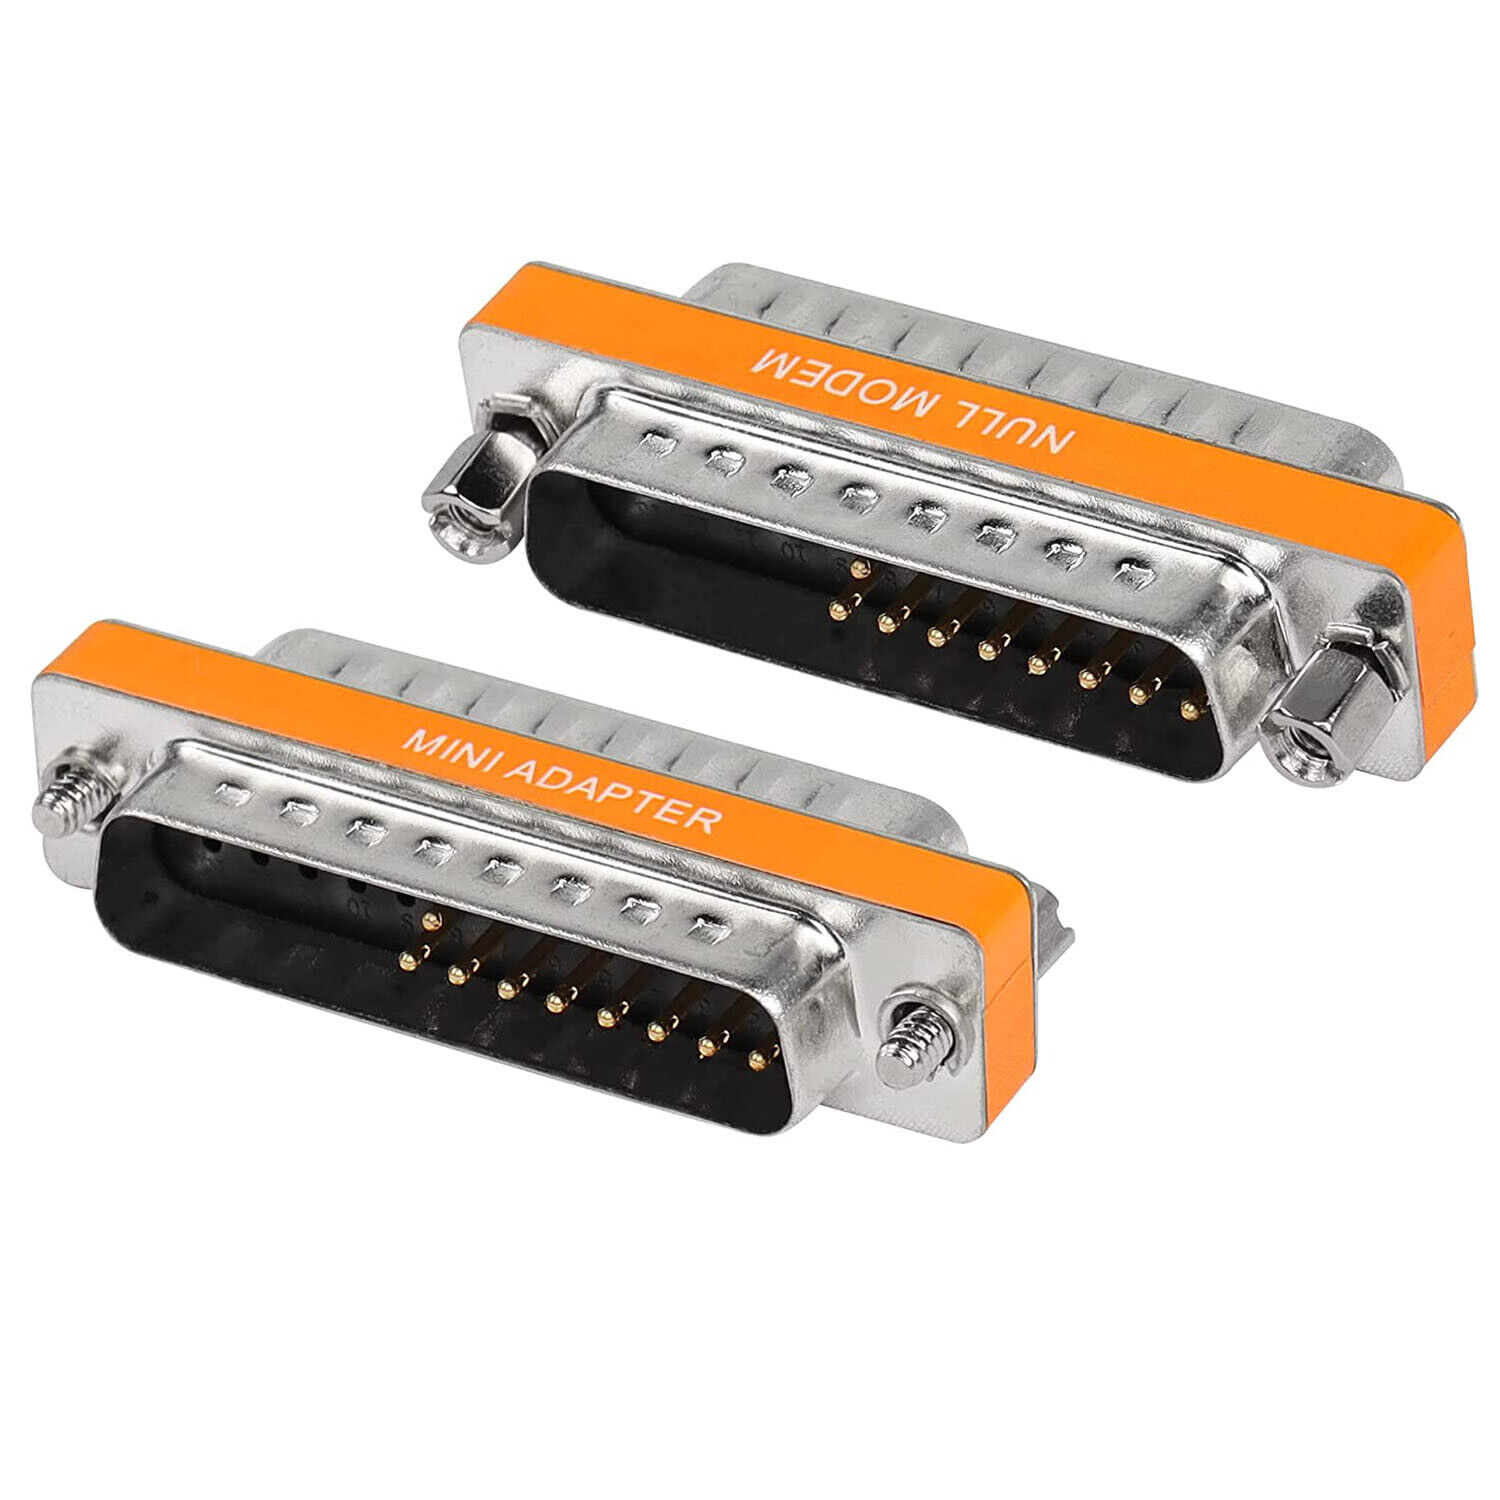 2x DB25 Male to DB25 Male RS-232 D-SUB VGA Gender Changer Data Connector Adapter